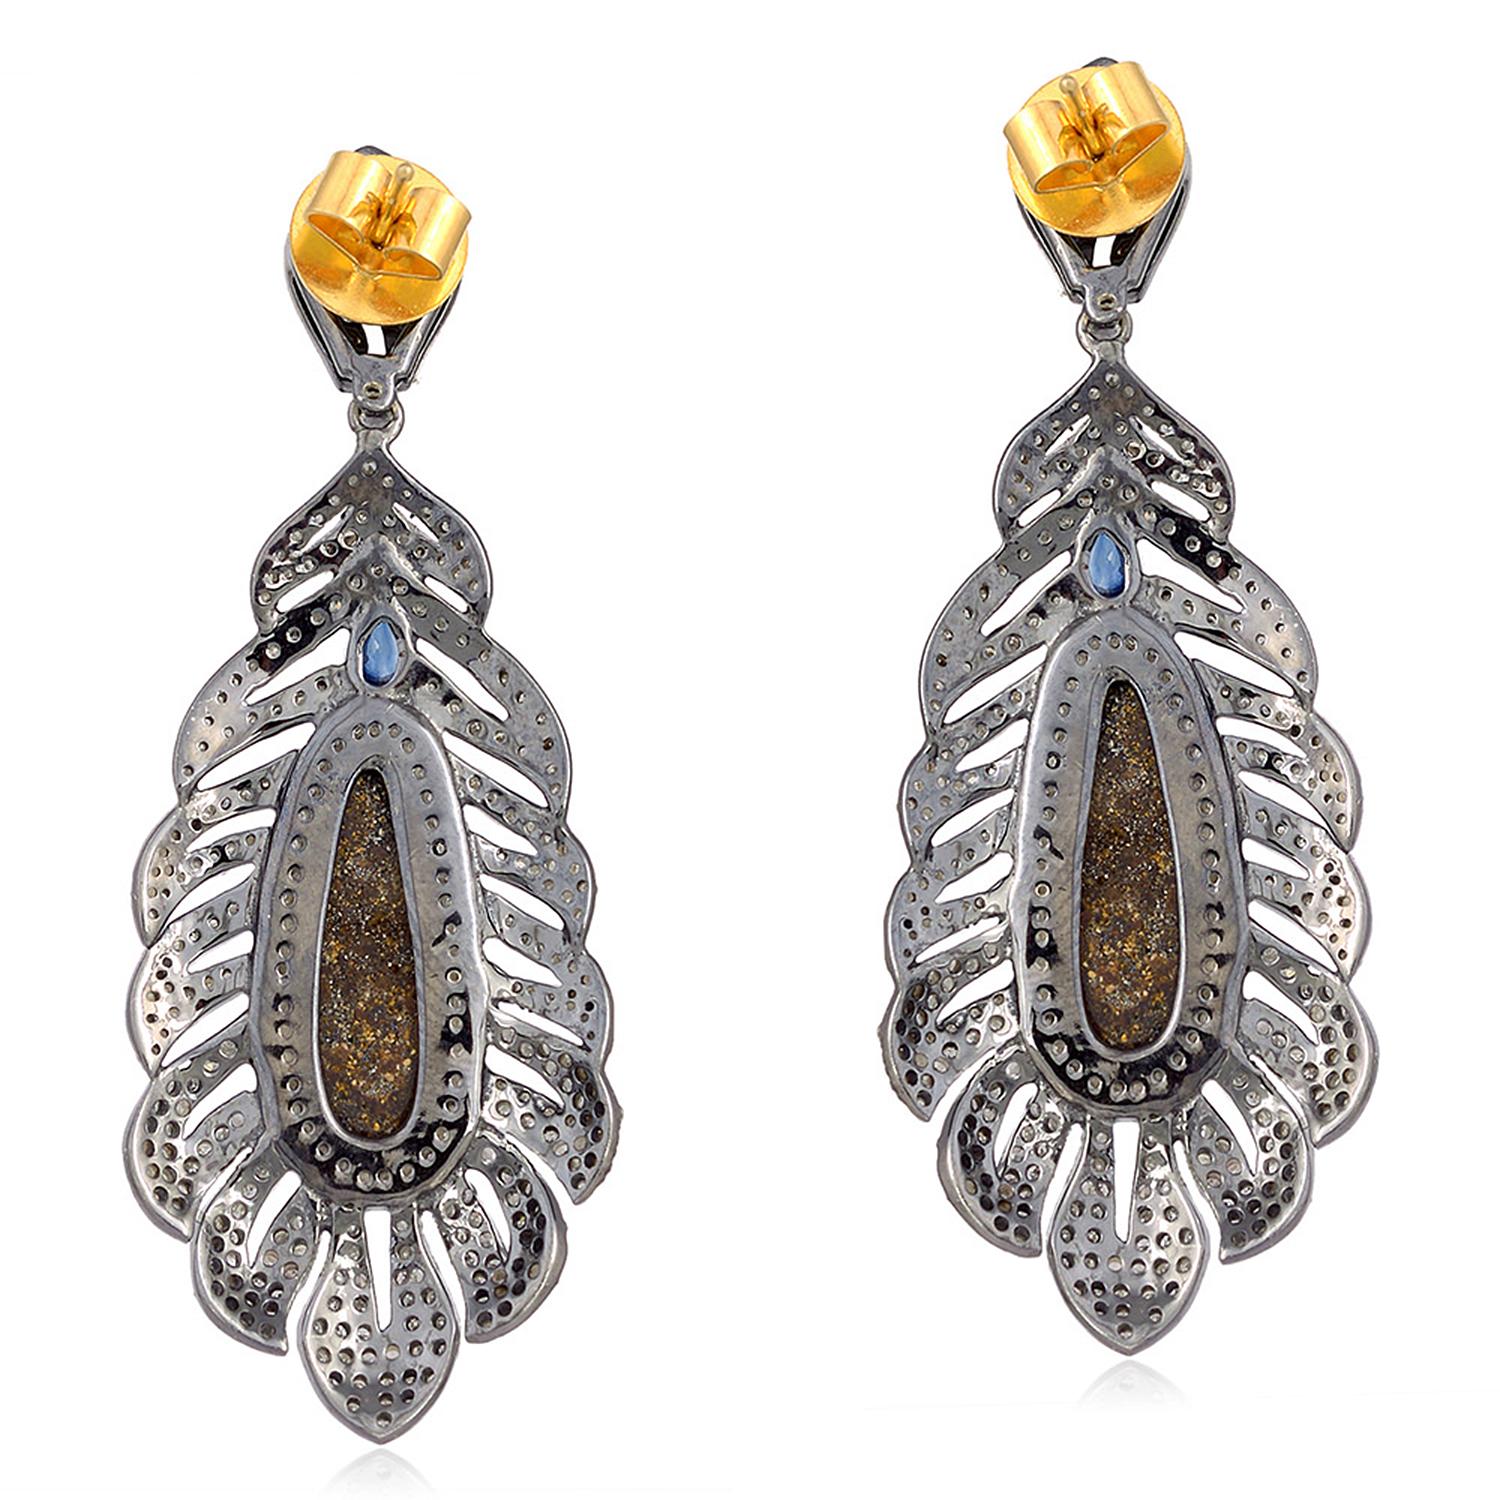 These stunning earrings are handmade in 18-karat gold and sterling silver.  
It is set with 5.8 carats opal doublets, .50 carats blue sapphire and 2.56 carats diamonds in blackened finish. 

FOLLOW  MEGHNA JEWELS storefront to view the latest